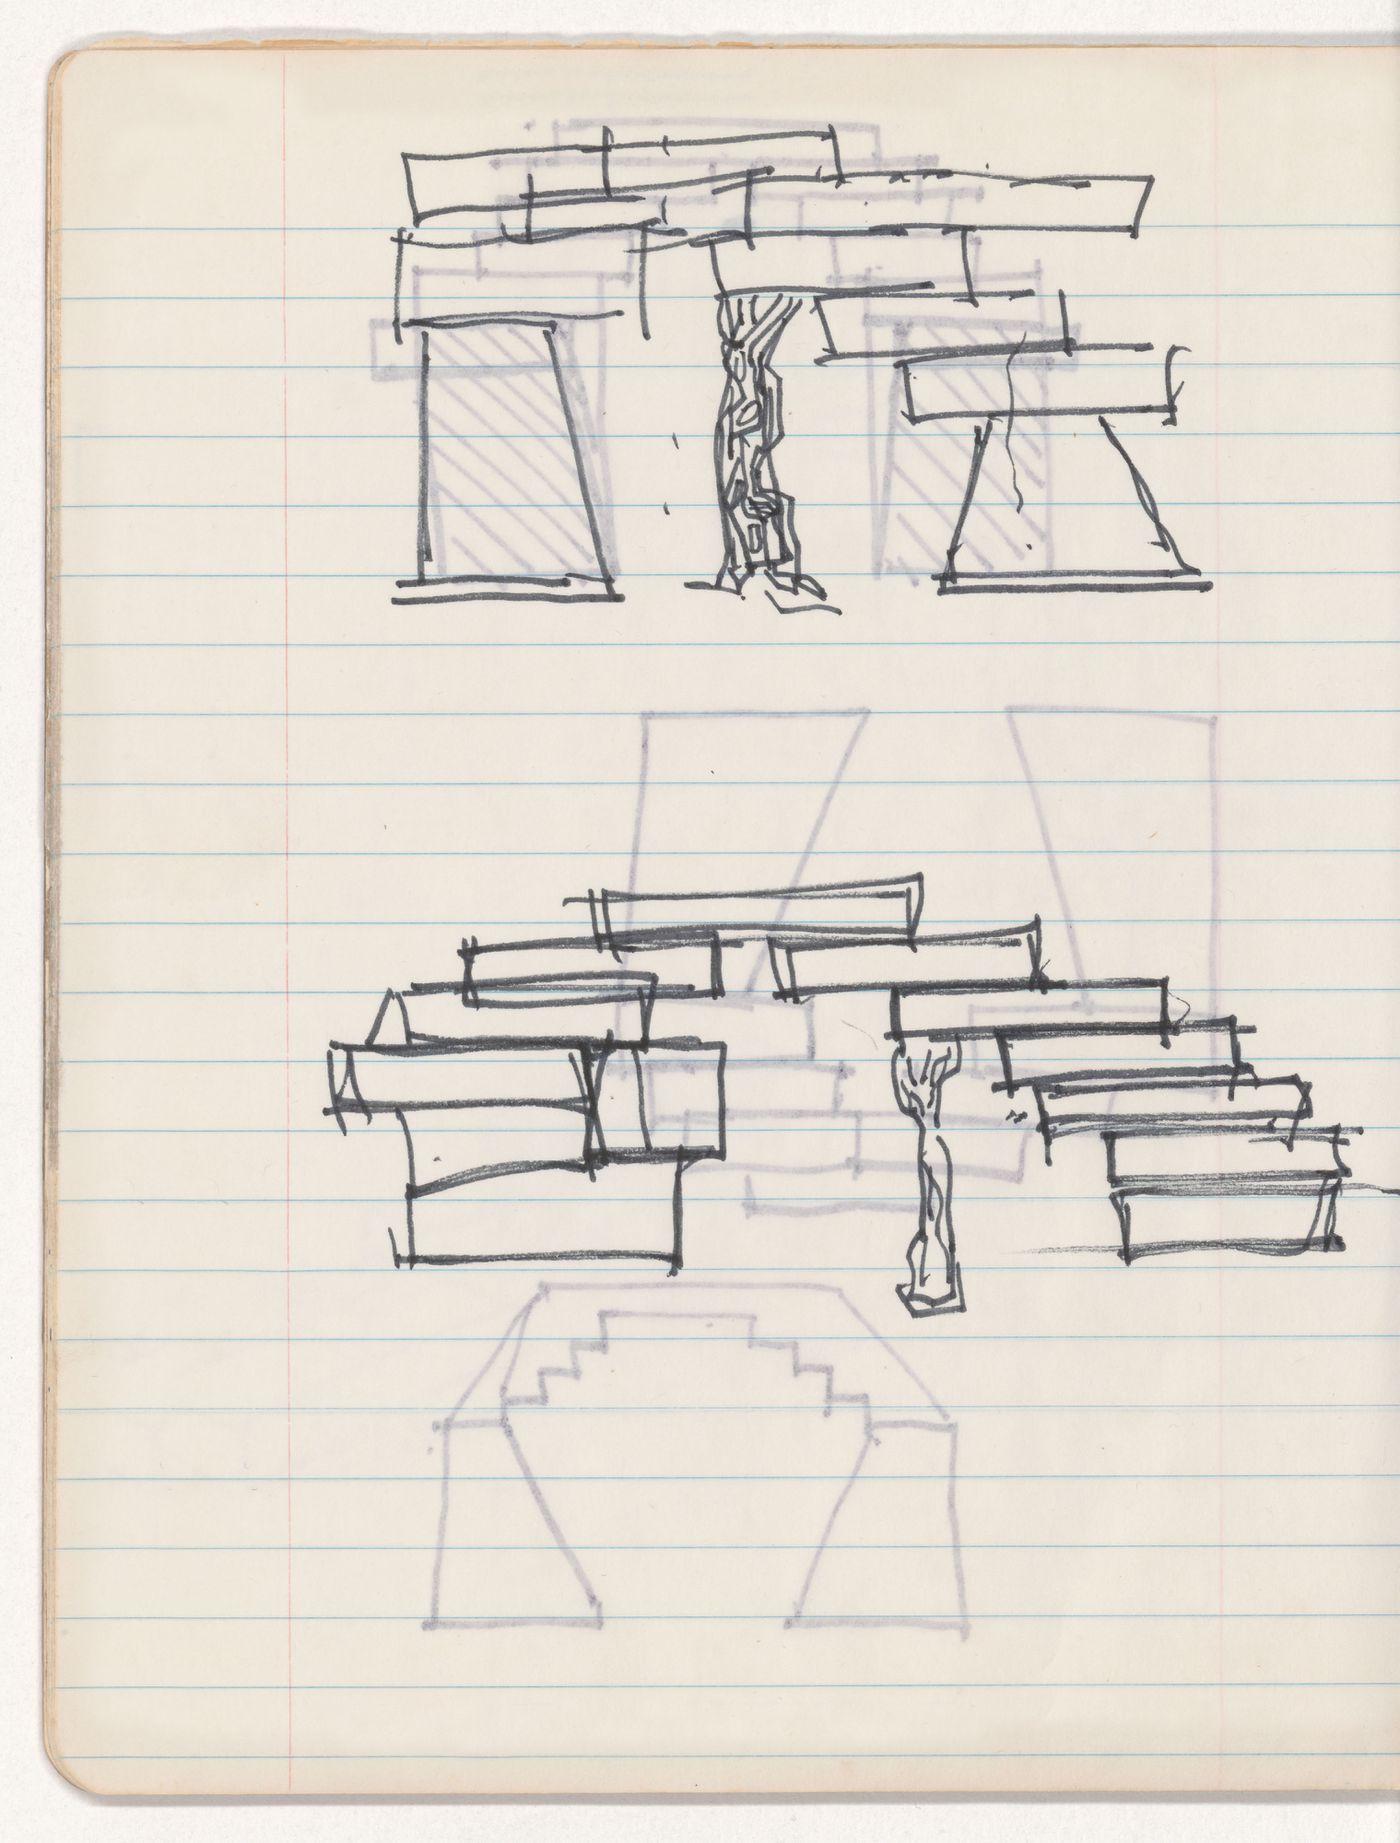 Sketches for Paint & garbage cathederal [sic]